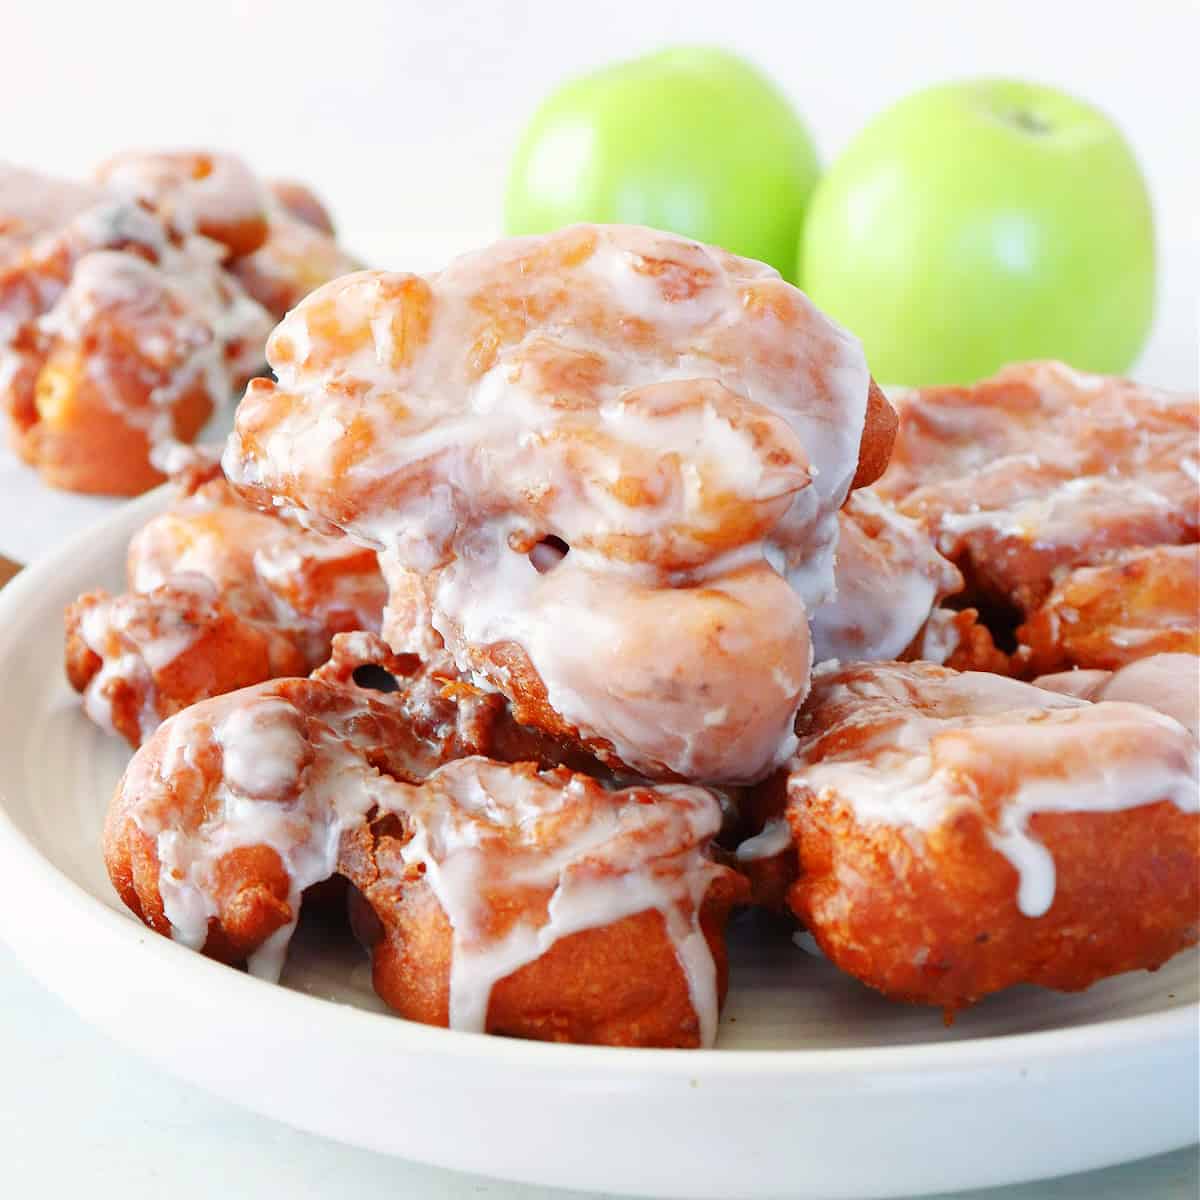 Apple fritters on a white plate.